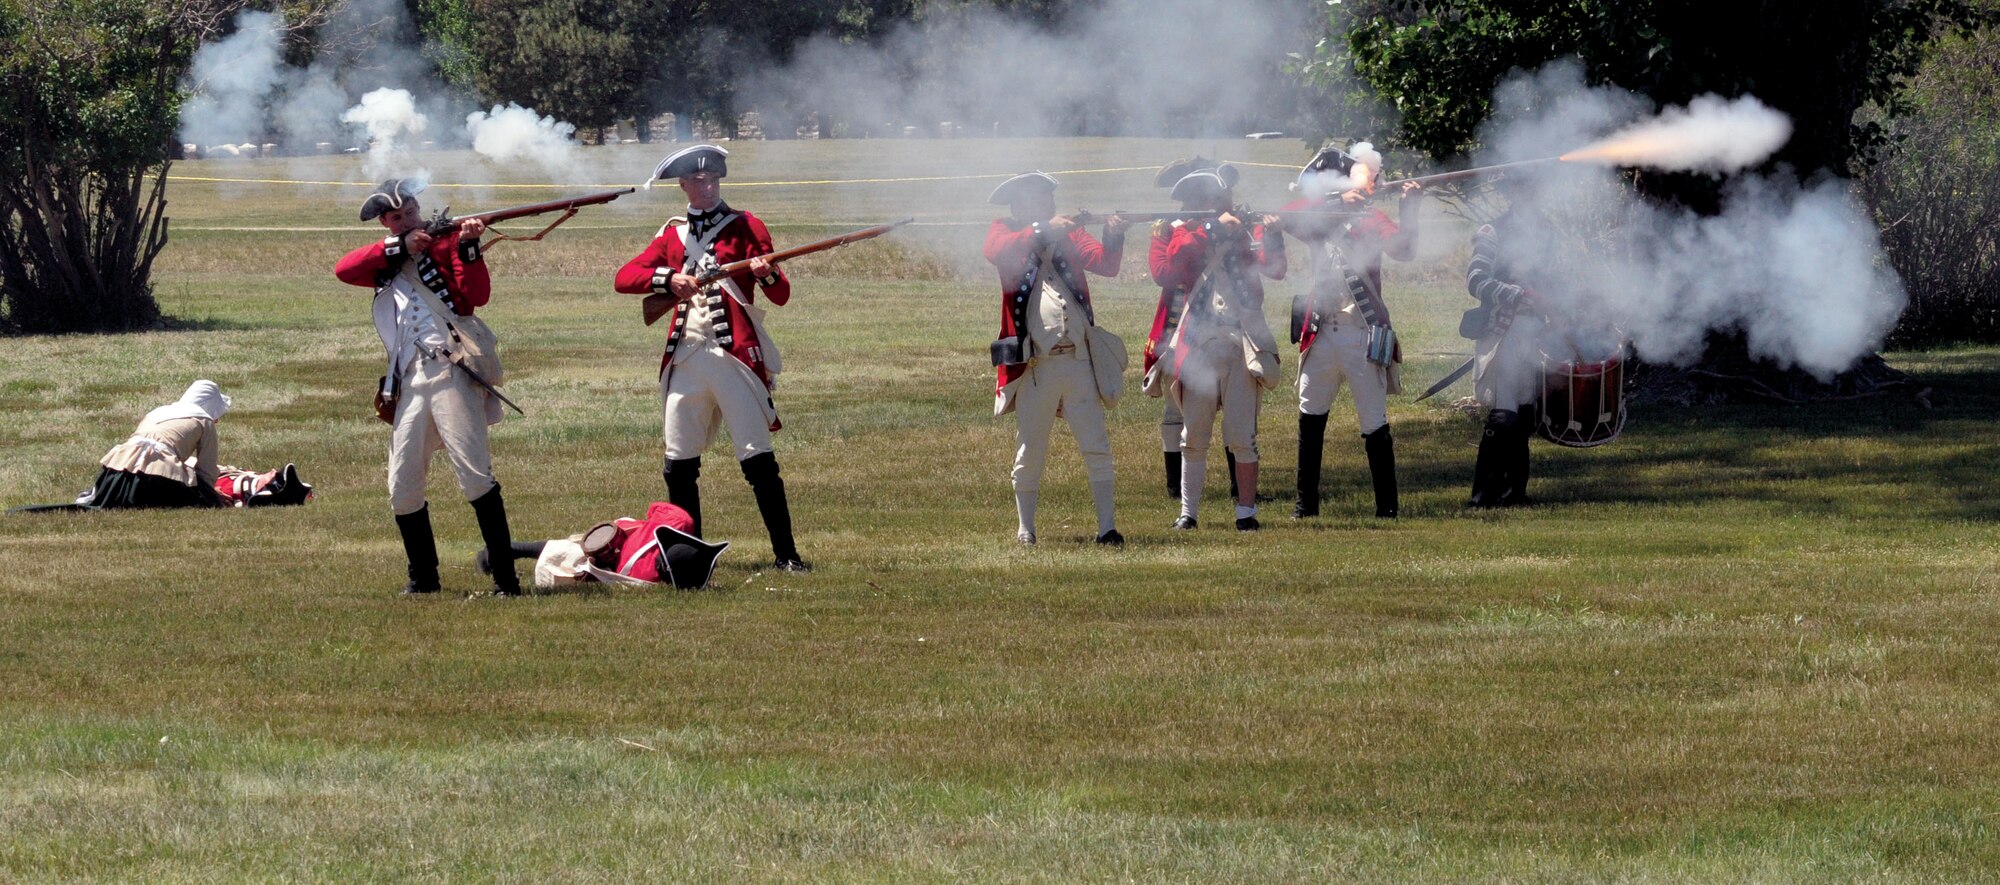 British re-enactors fire their muskets towards the American colonialists during a reenactment July 23.. (U.S. Air Force photo by Blaze Lipowski)